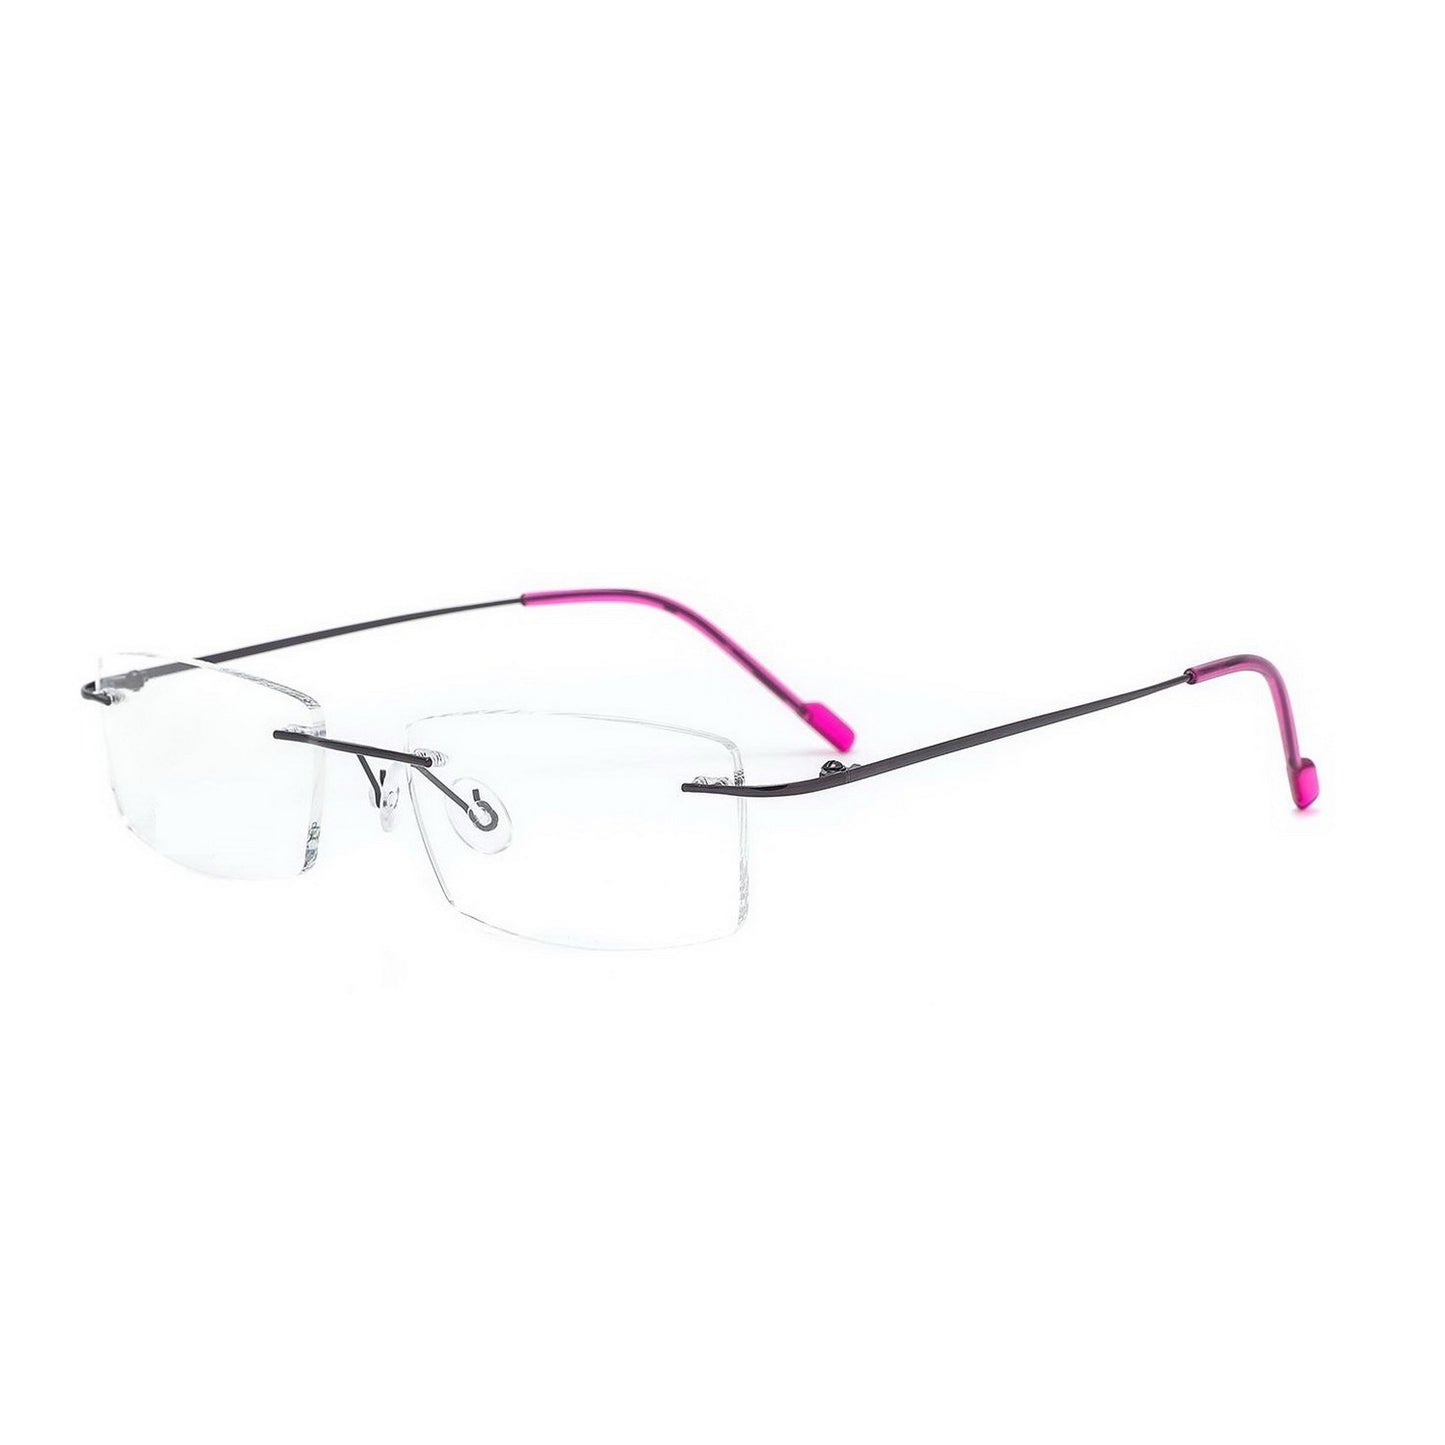 Classy Rectangle Rimless Glasses for Men and Women